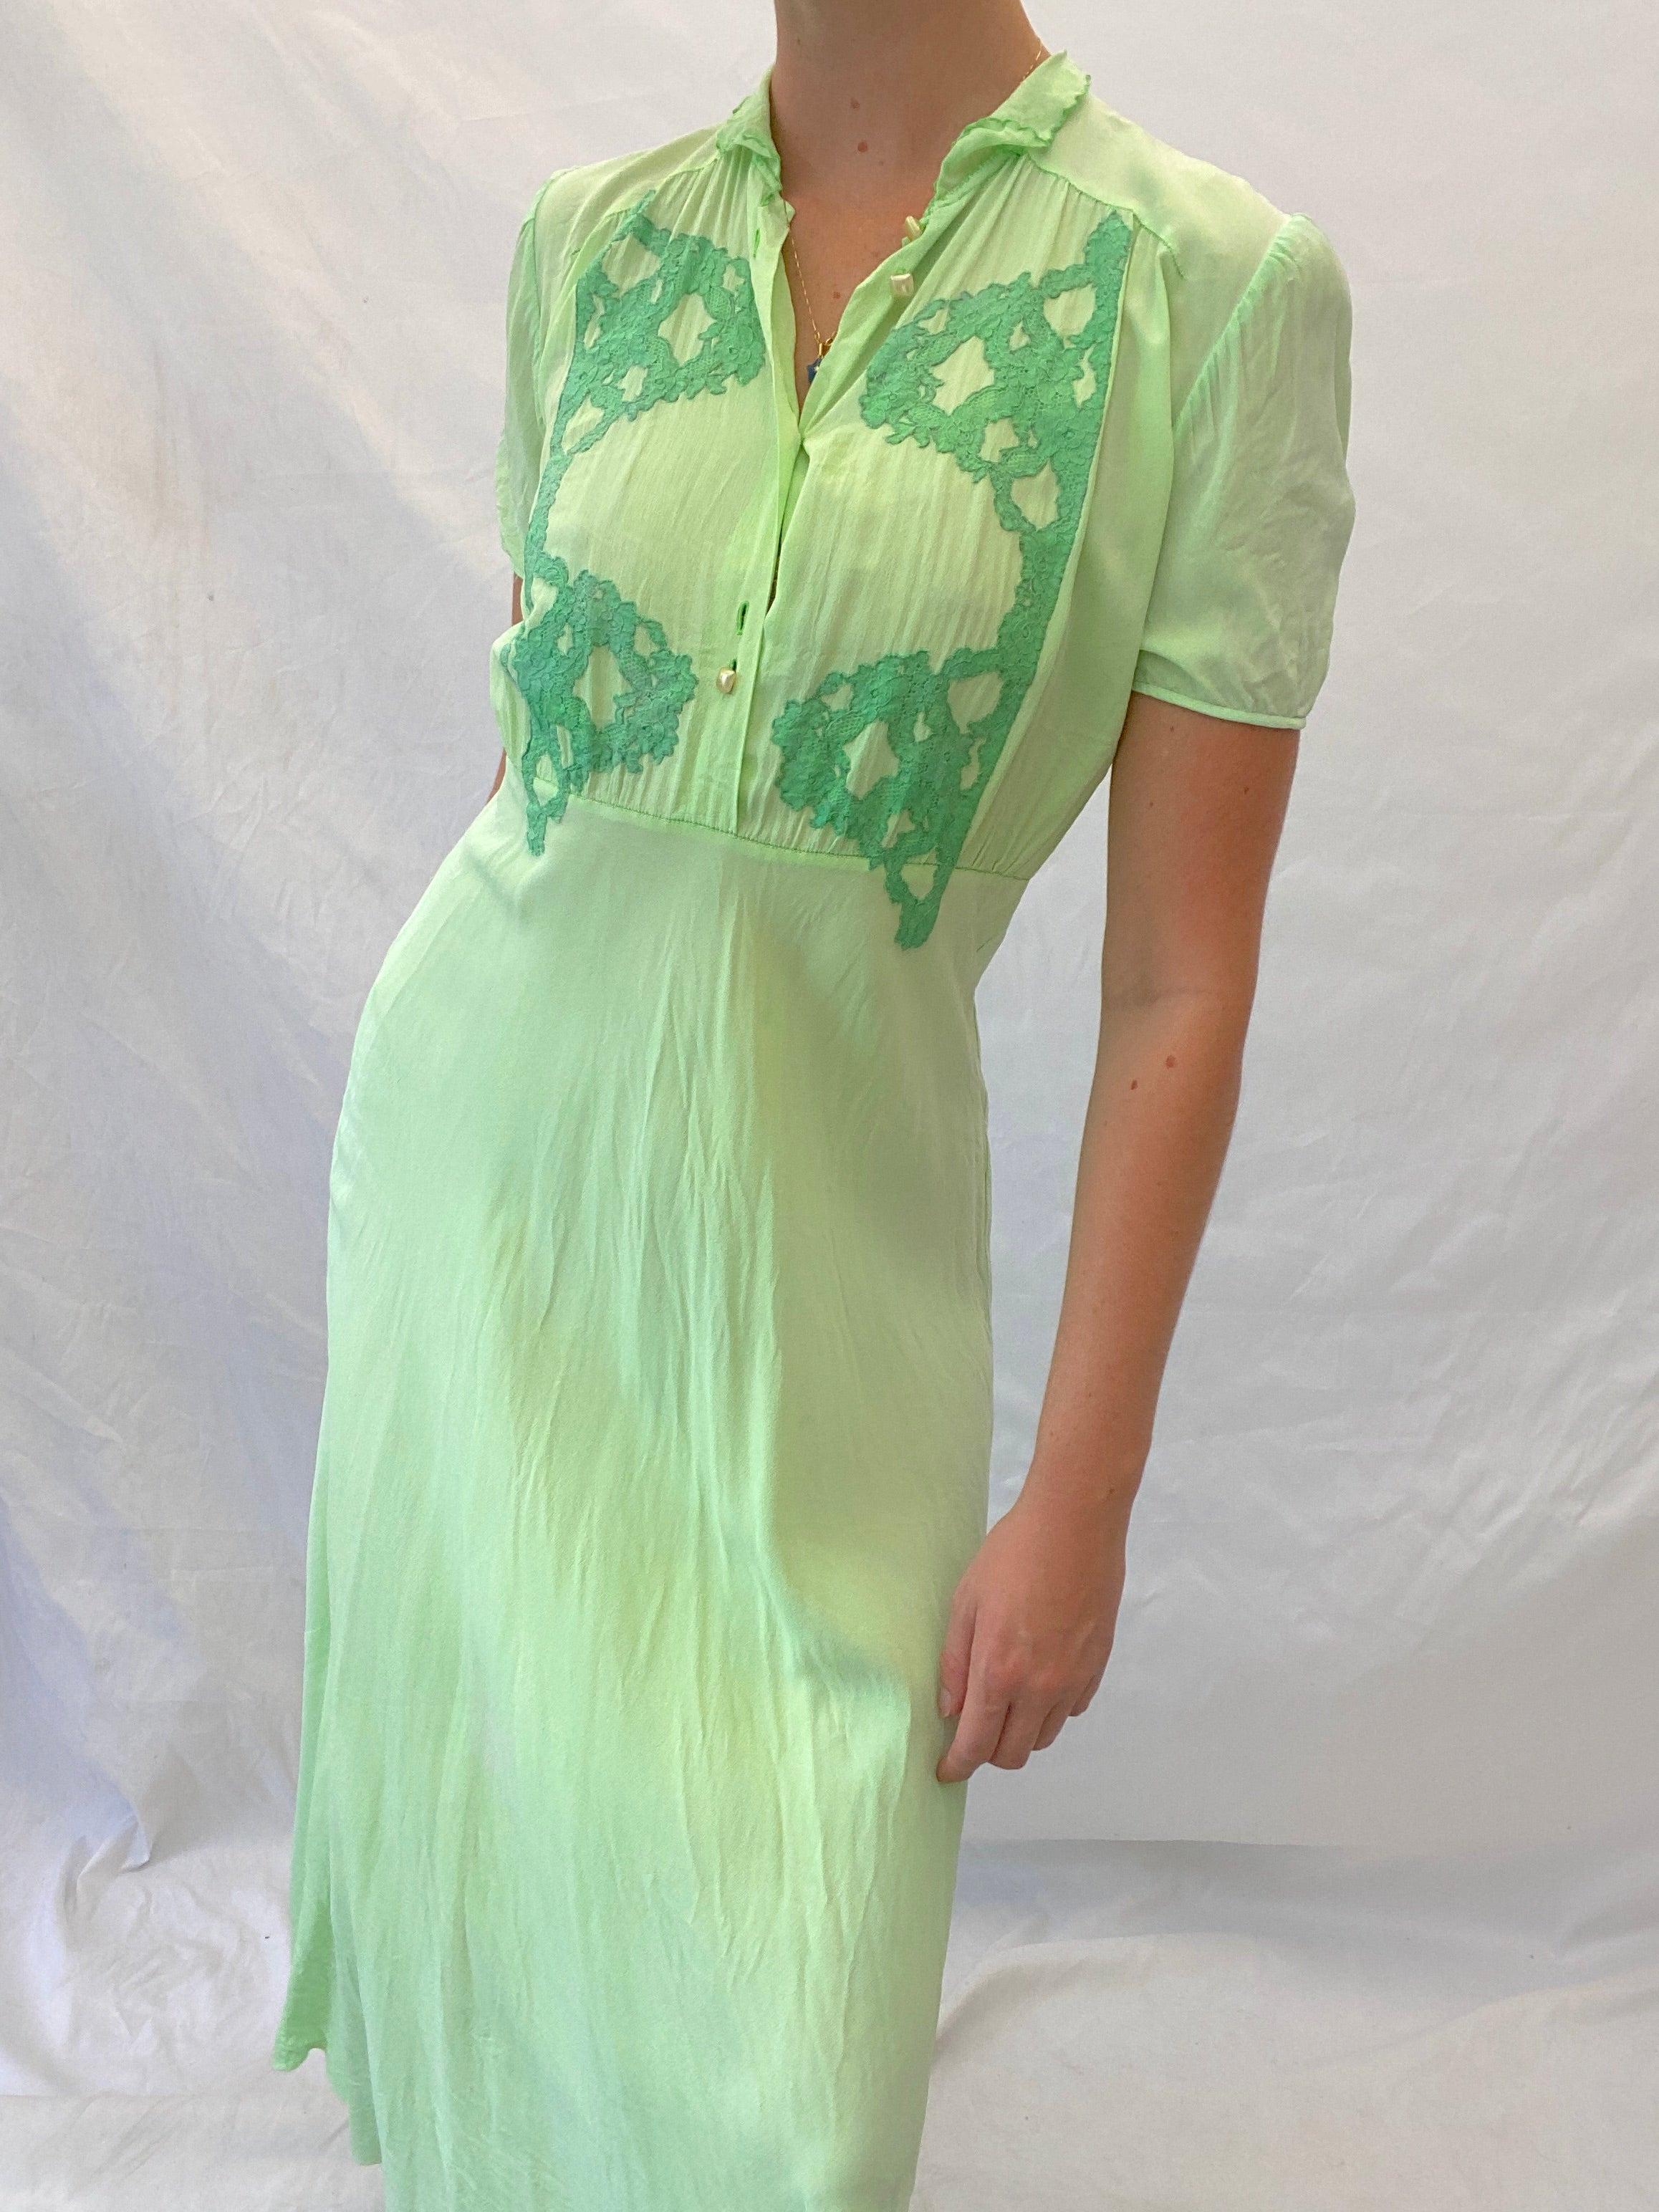 Hand Dyed Bright Green Short Sleeve Silk Dress with Lace